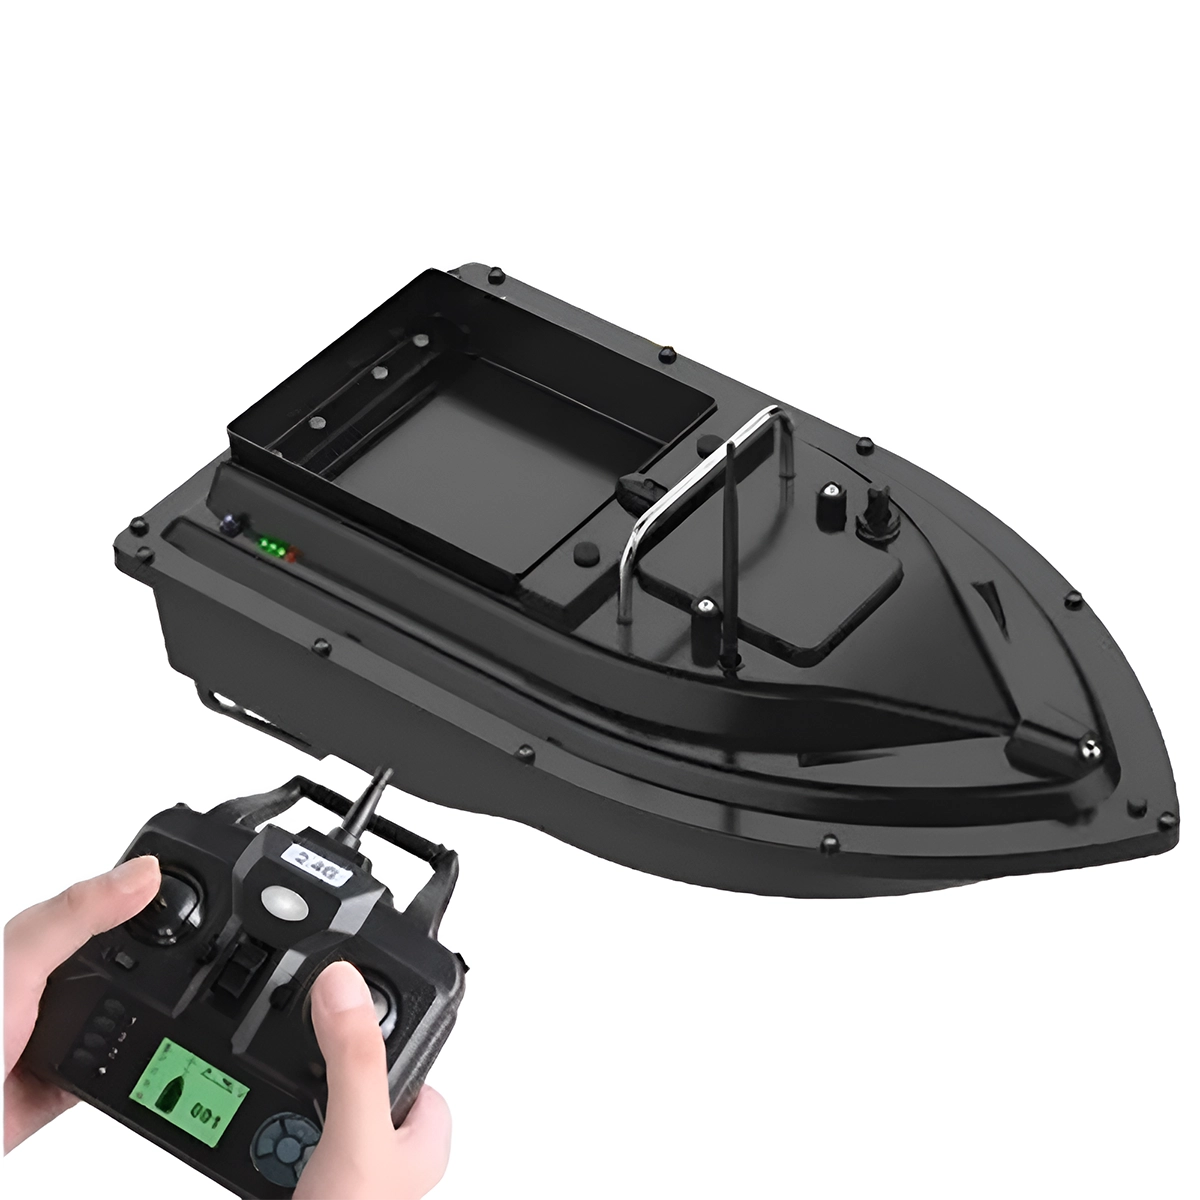 Smart GPS Remote Control Fishing Bait Boat for Fishing – VWOO